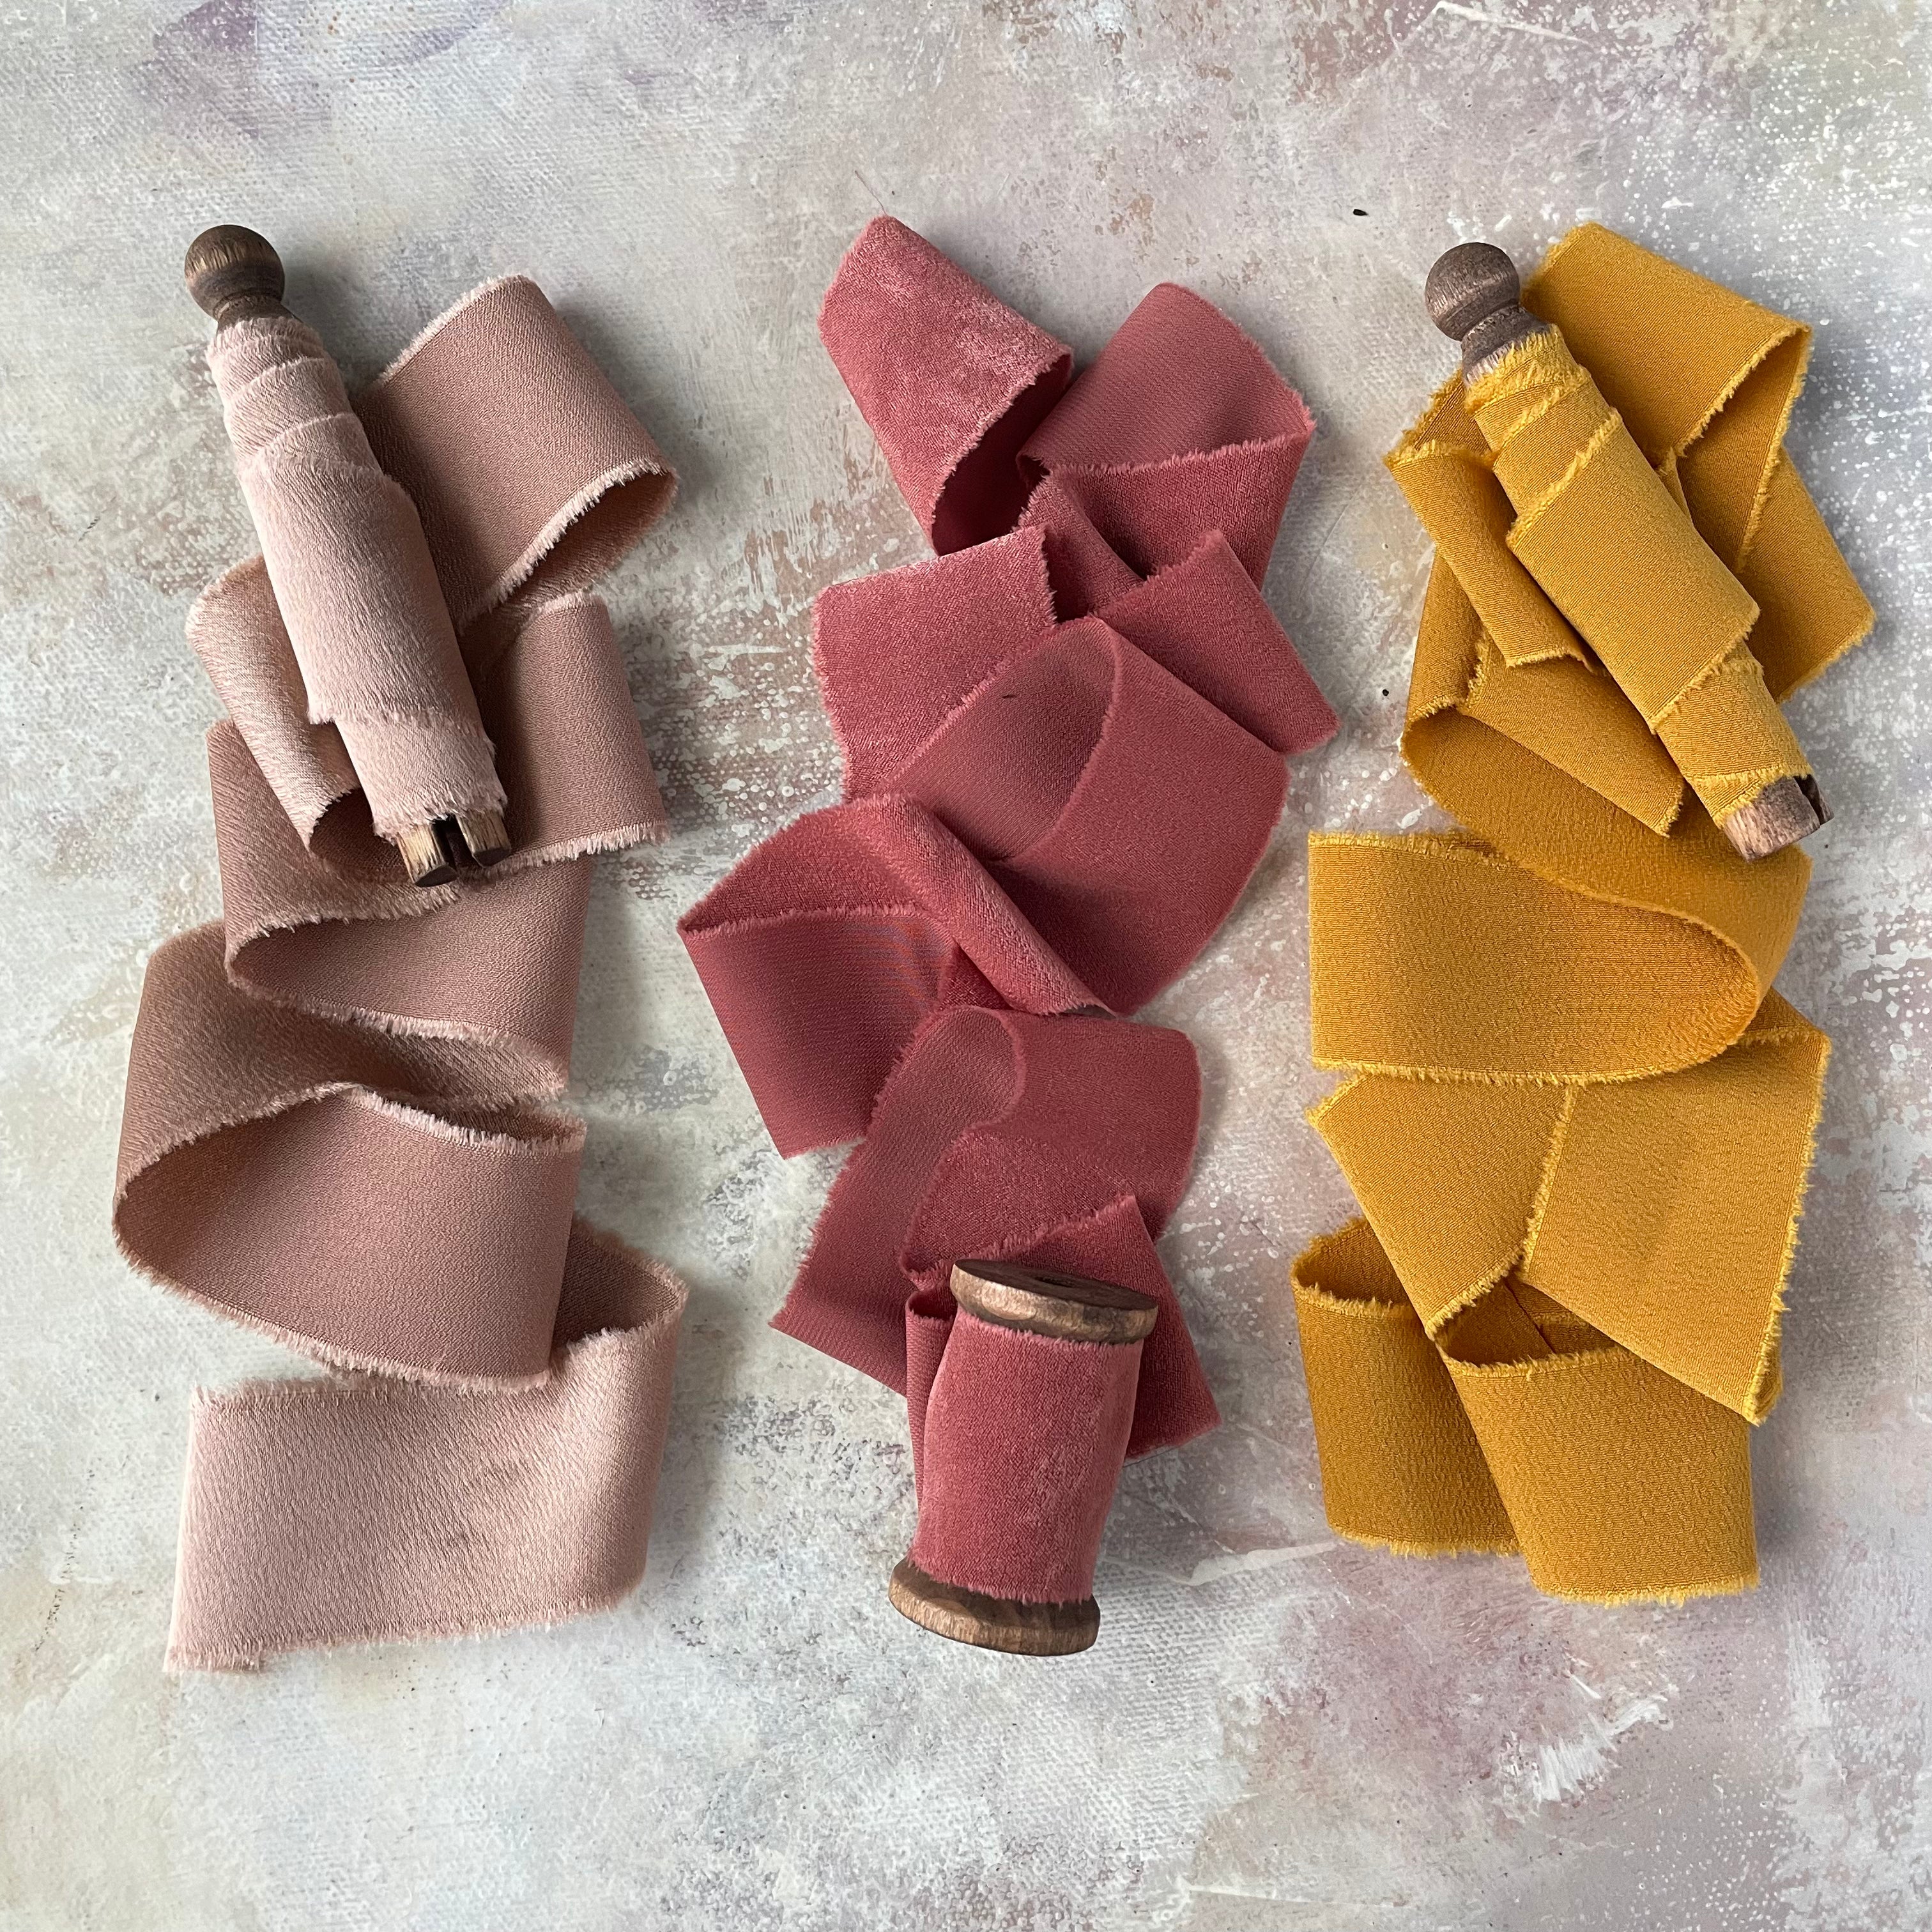 Mustard Styling Ribbon for Flat Lays